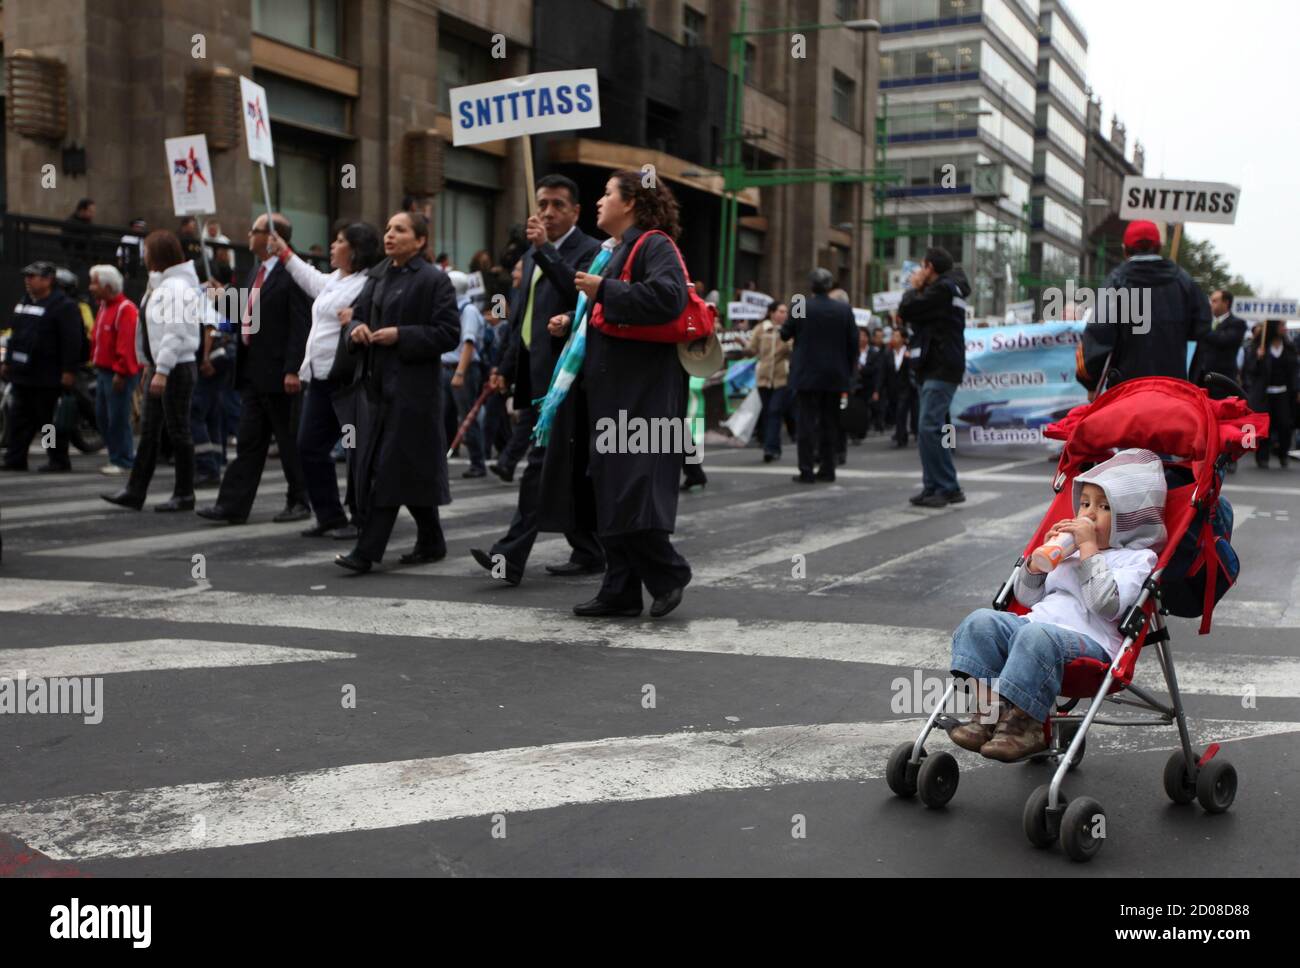 A child is seen as people walk past during a protest in Mexico City January 31, 2012. Thousands of protesters and union workers took to the streets in a march called 'Movement for Food and Energy Sovereignty, Worker's Rights and Democratic Freedom', to protest about economic issues affecting them such as unemployment and the ongoing drought causing severe shortage of food and water. REUTERS/Edgard Garrido (MEXICO - Tags: POLITICS CIVIL UNREST BUSINESS) Stock Photo